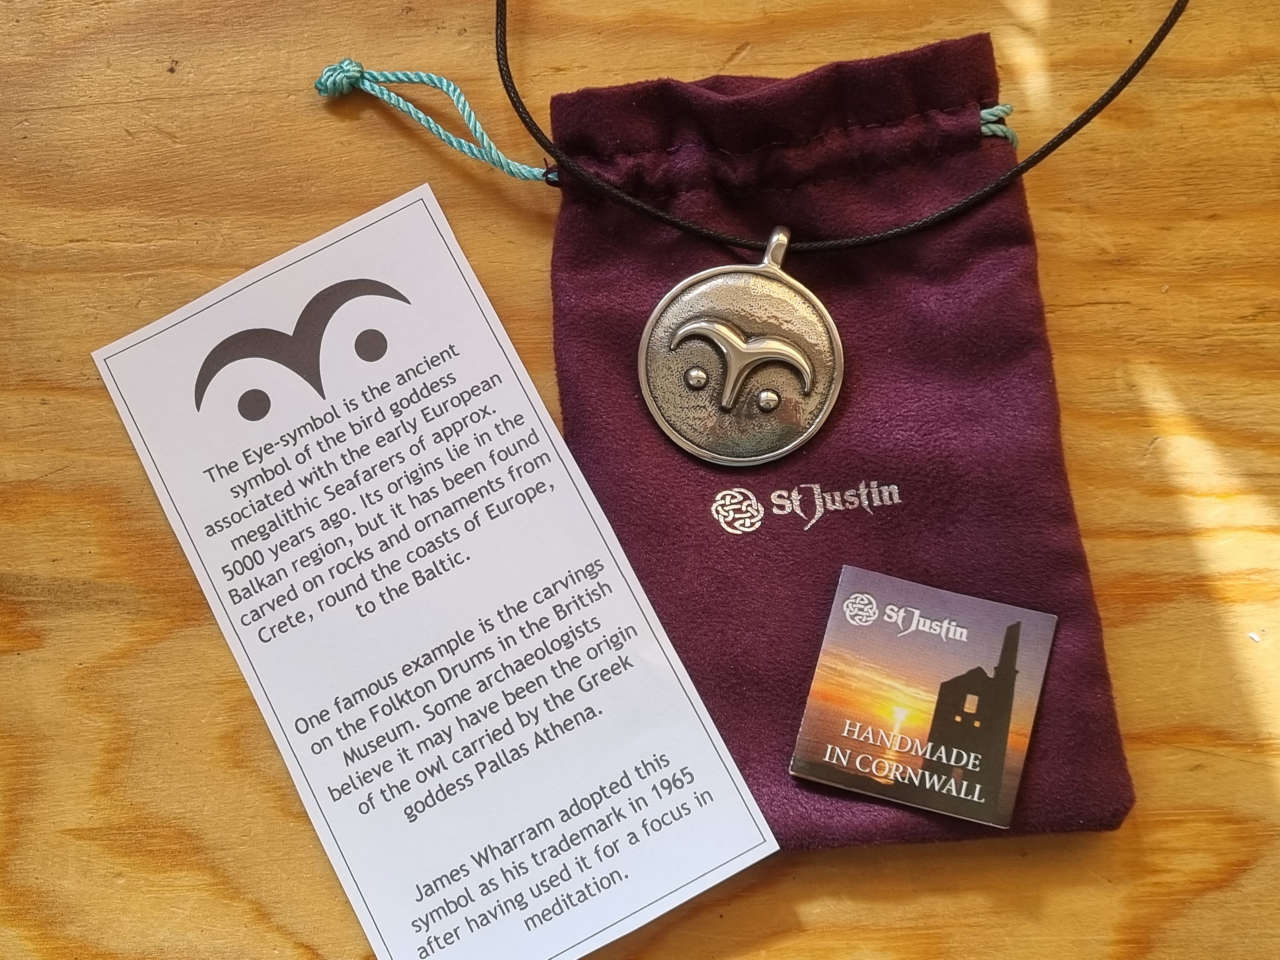 Eye symbol pendant with purple pouch, small booklet and a leaflet